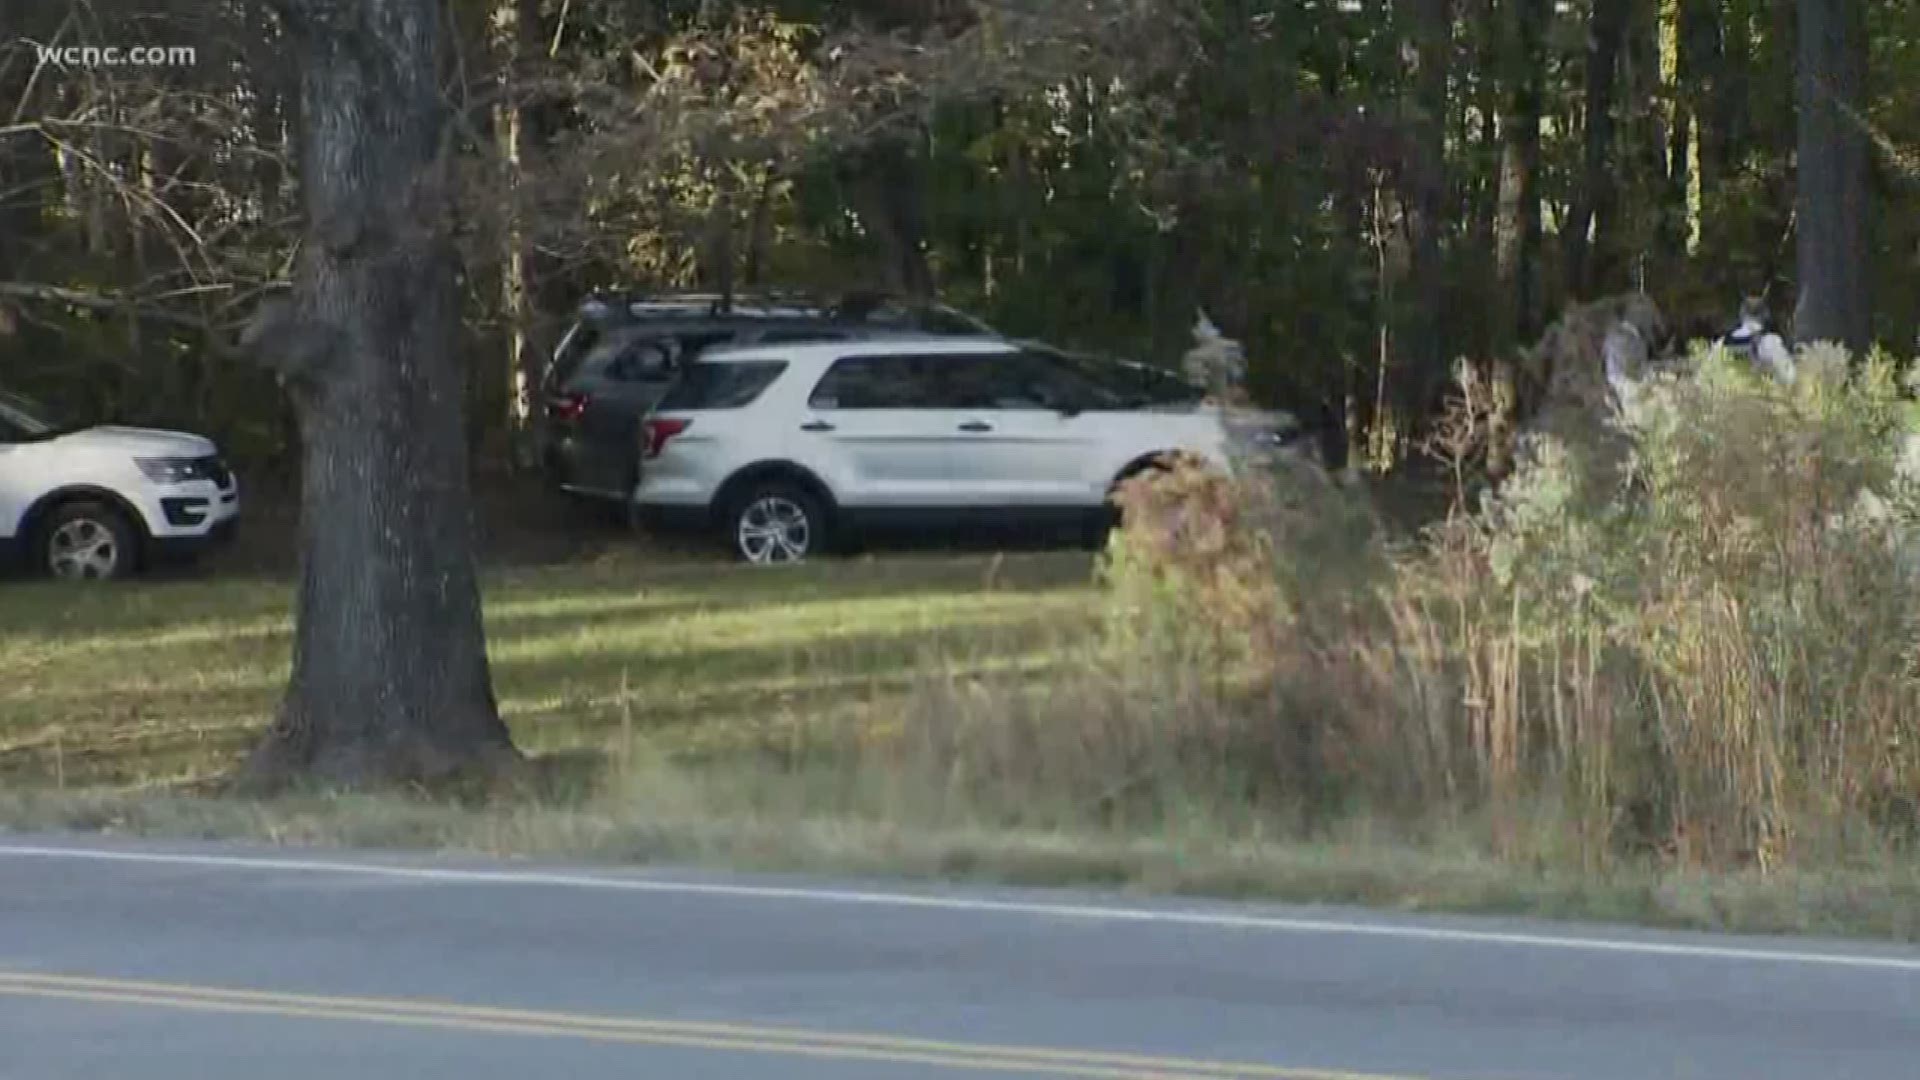 Authorities were led on a pursuit throughout southeast Charlotte that ended up in Matthews. At this time, it's not clear why police were following the vehicle.